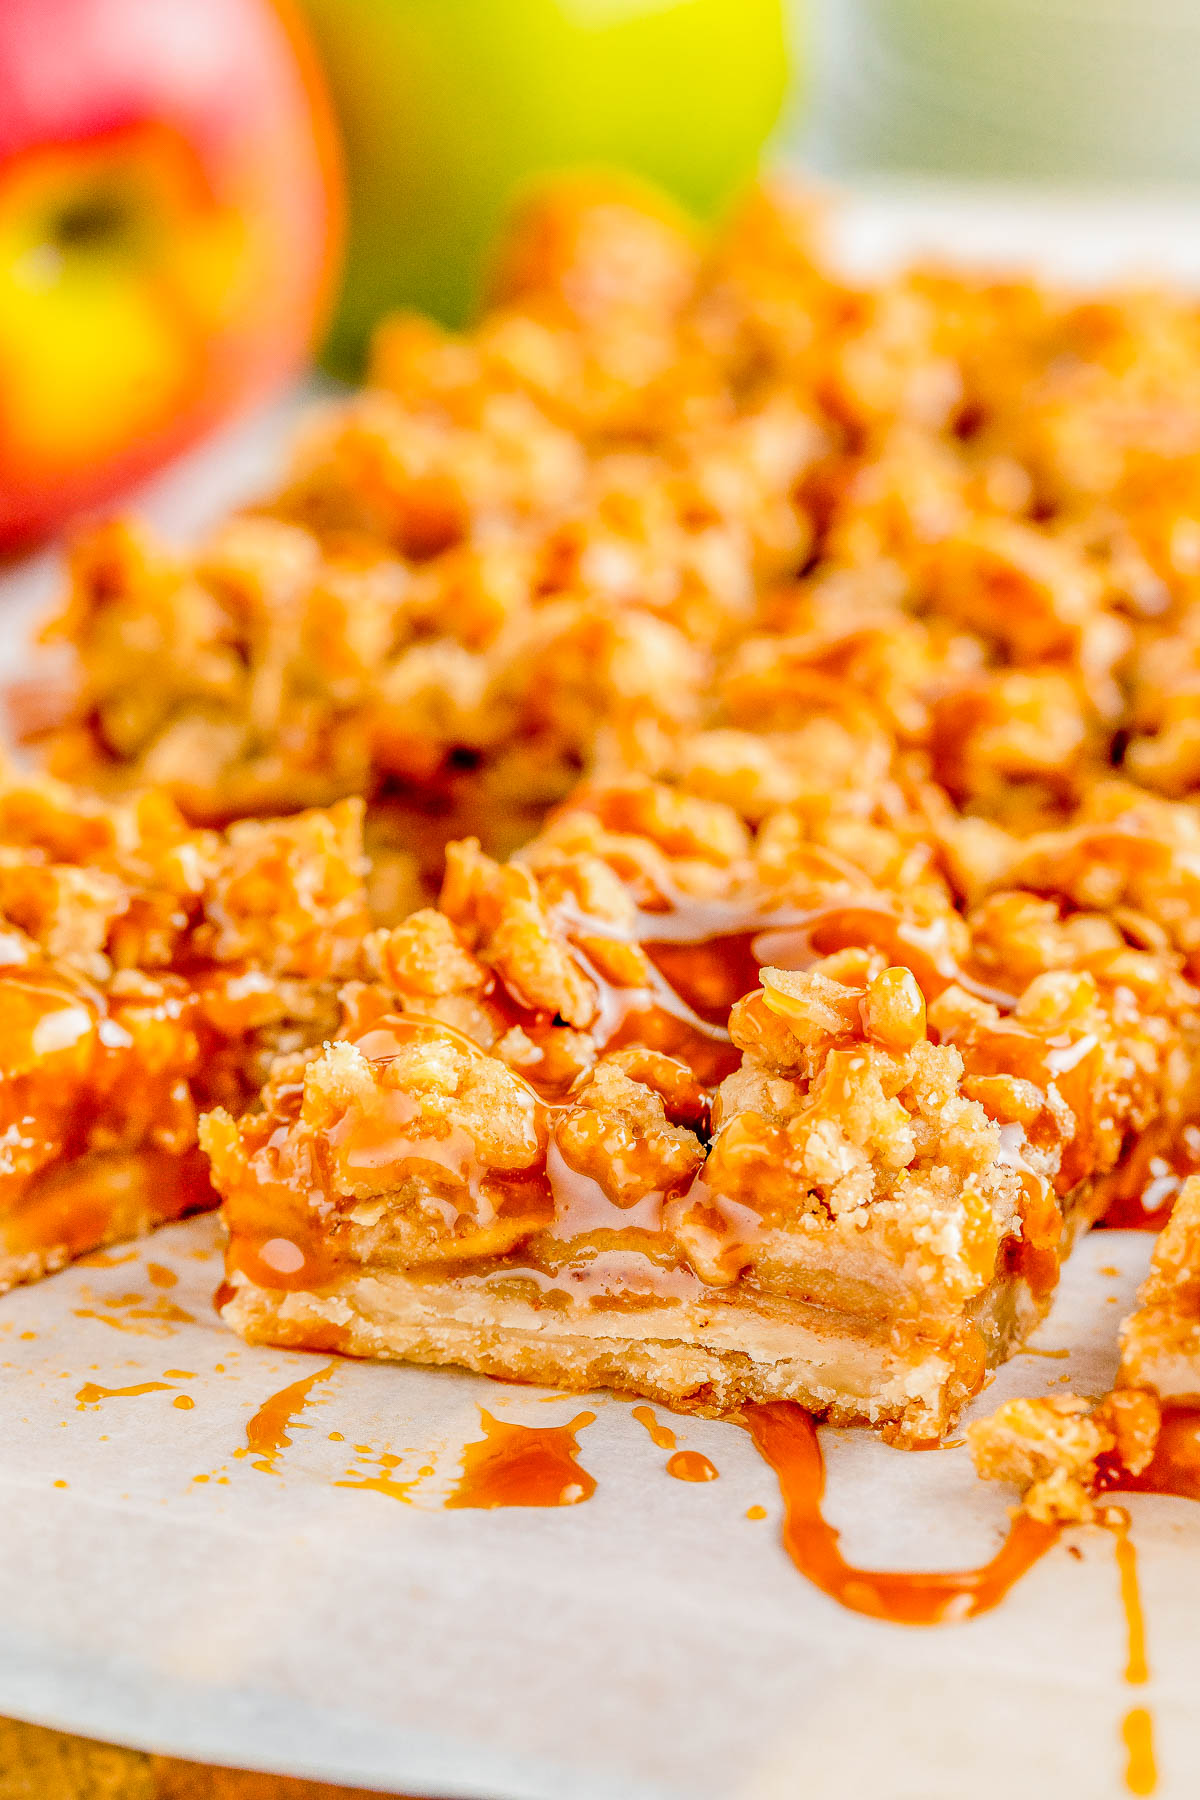 Apple Pie Bars — A flaky, buttery crust is topped with homemade apple pie filling and an oat crumble topping in these INCREDIBLE spiced apple pie bars! Salted caramel sauce is the finishing touch because nothing beats the combination of caramel and apples! Make these EASY, no-mixer bars as written for a smaller gathering, or double it for a party!